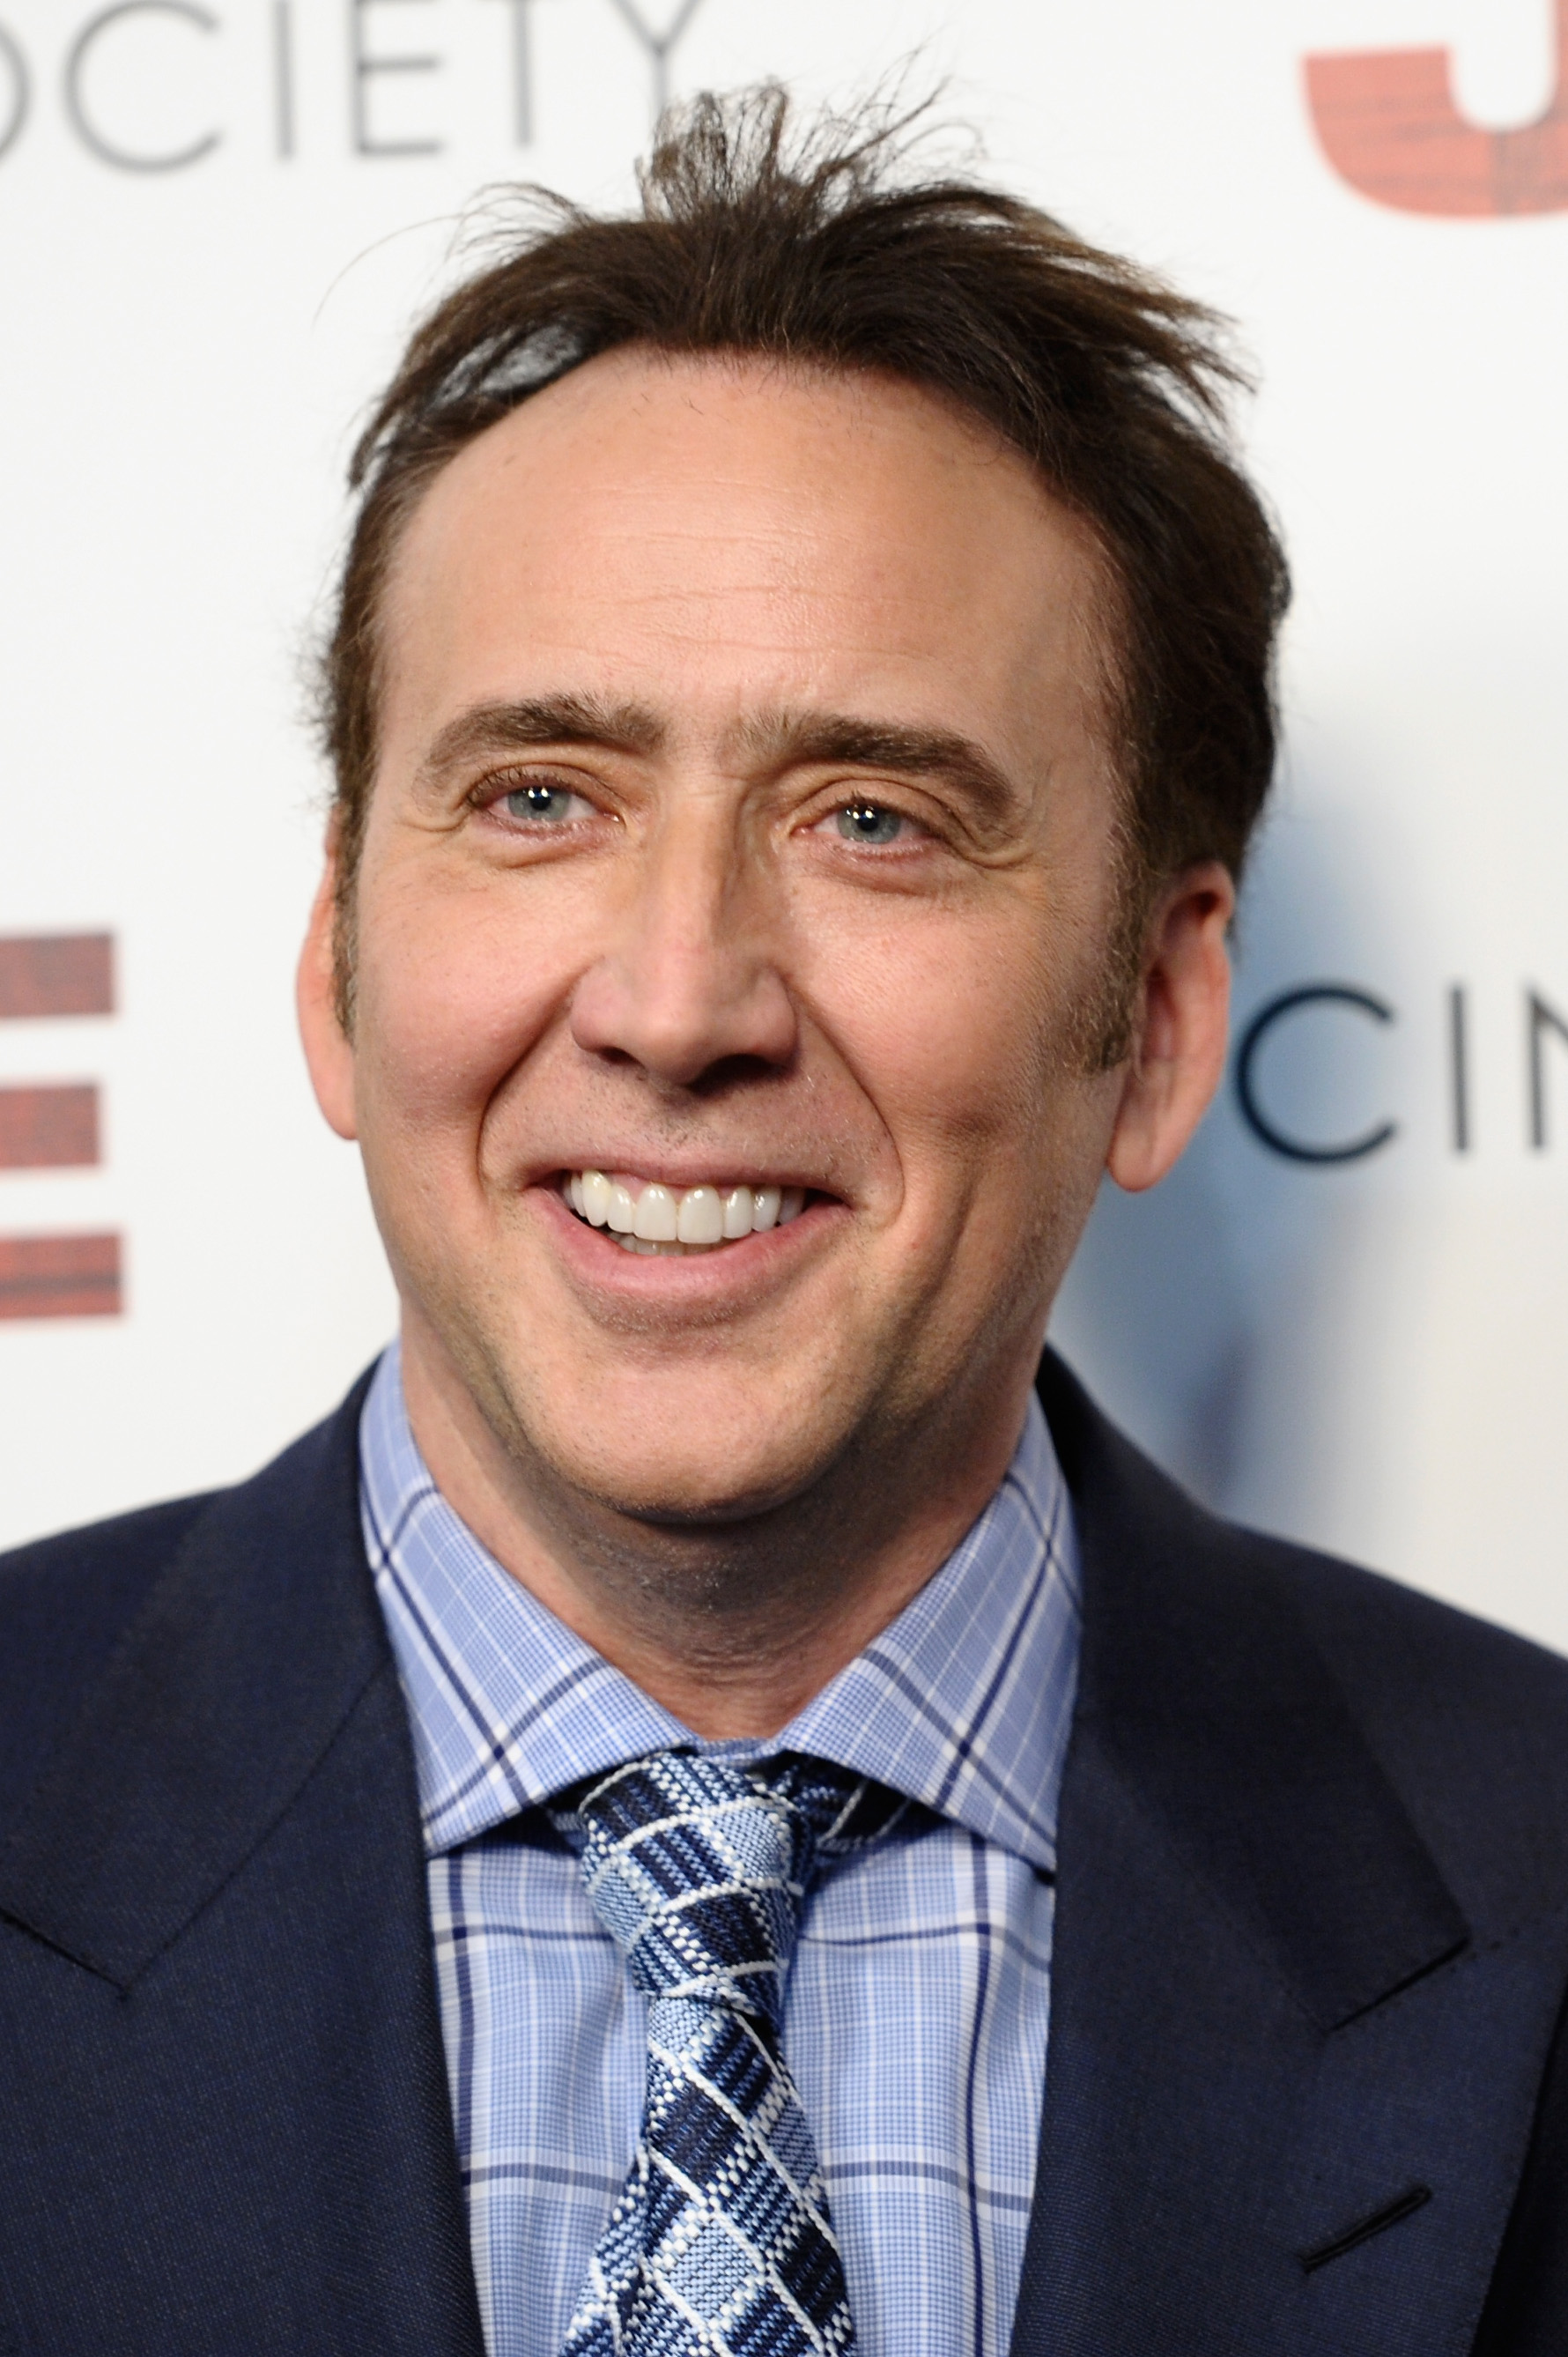 Nicolas Cage attends the a screening of "Joe" April 9, 2014 in New York City.